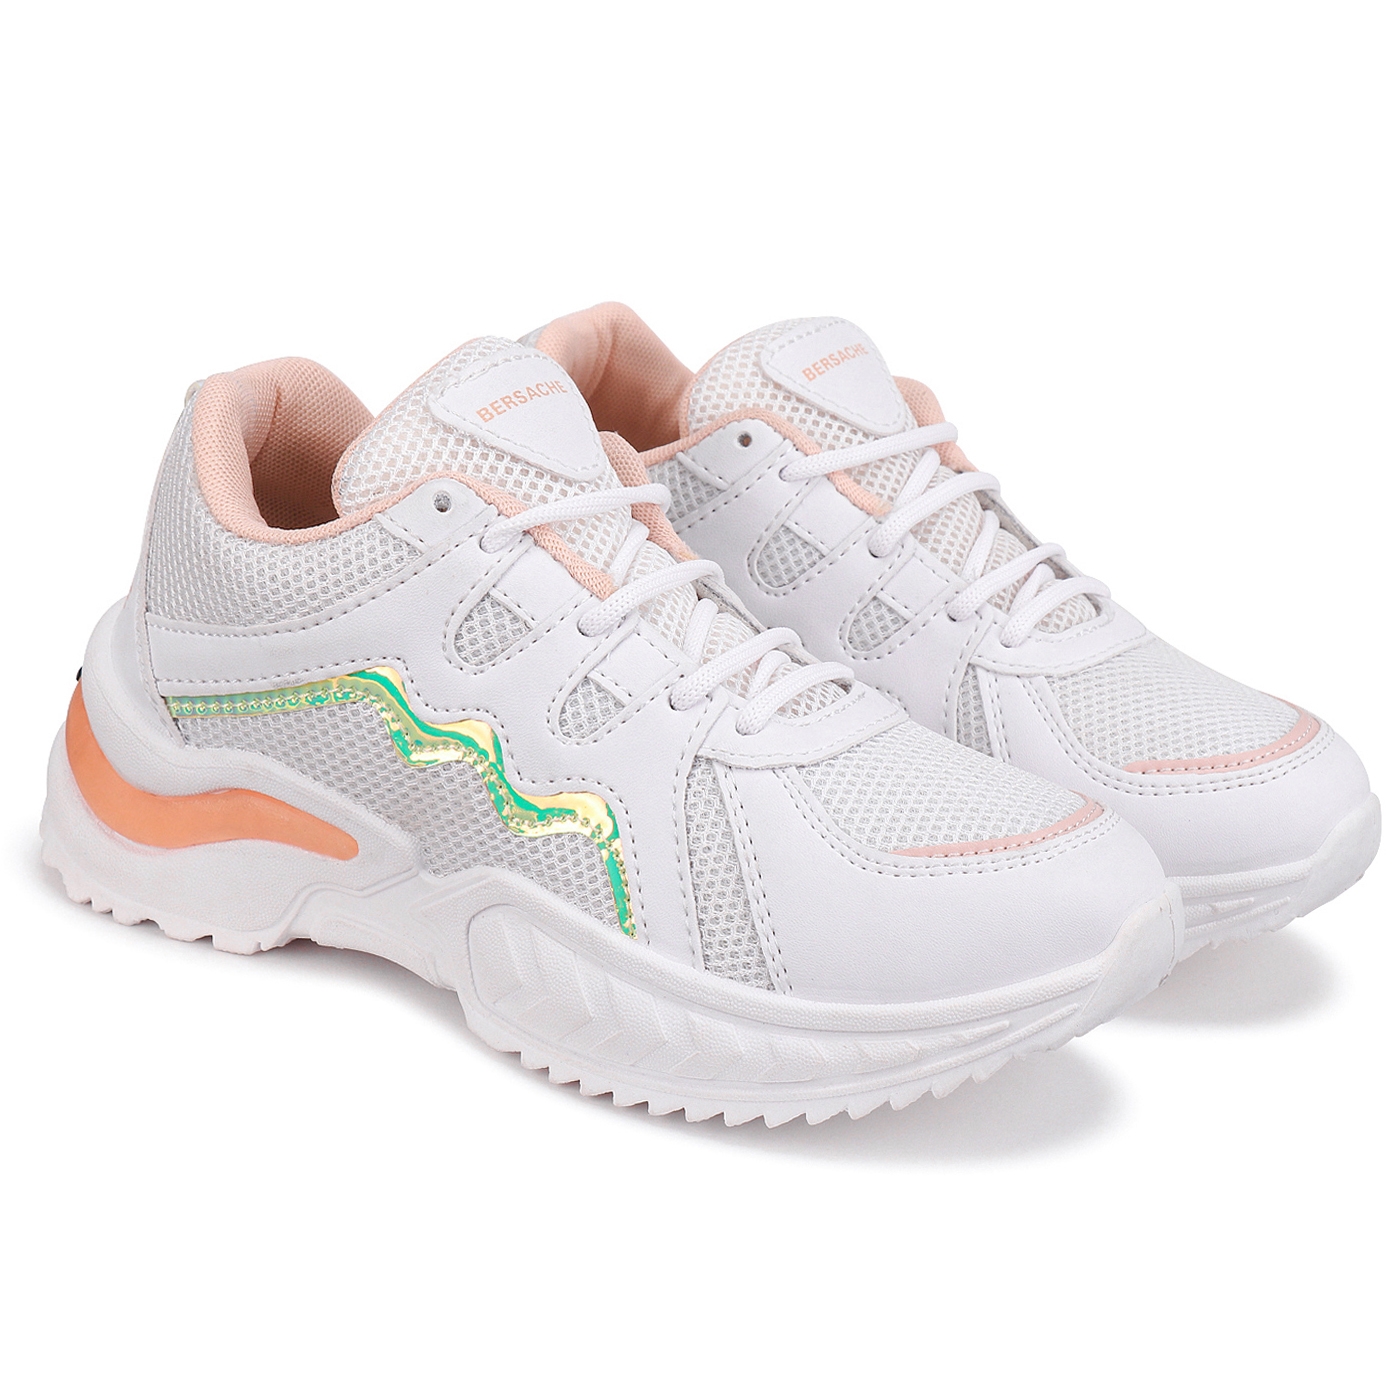 Bersache Sports Shoes For Women | Latest Stylish Sports Shoes For Women | Lace-Up Lightweight (White) Shoes For Running, Walking, gym ,Trekking and hiking Shoes For Women